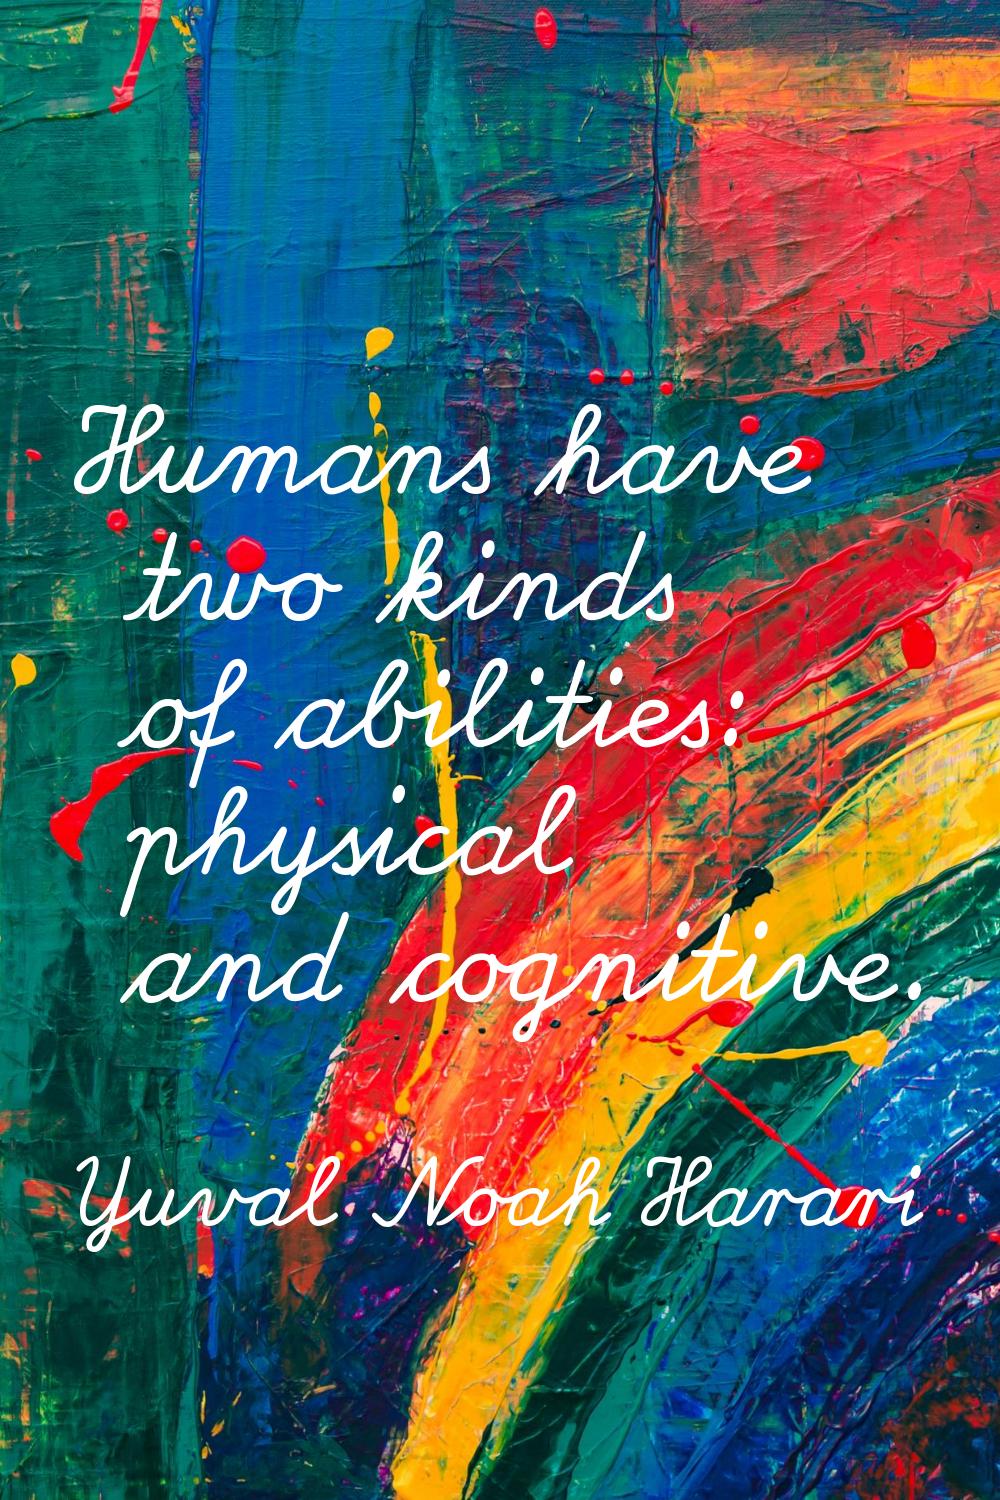 Humans have two kinds of abilities: physical and cognitive.